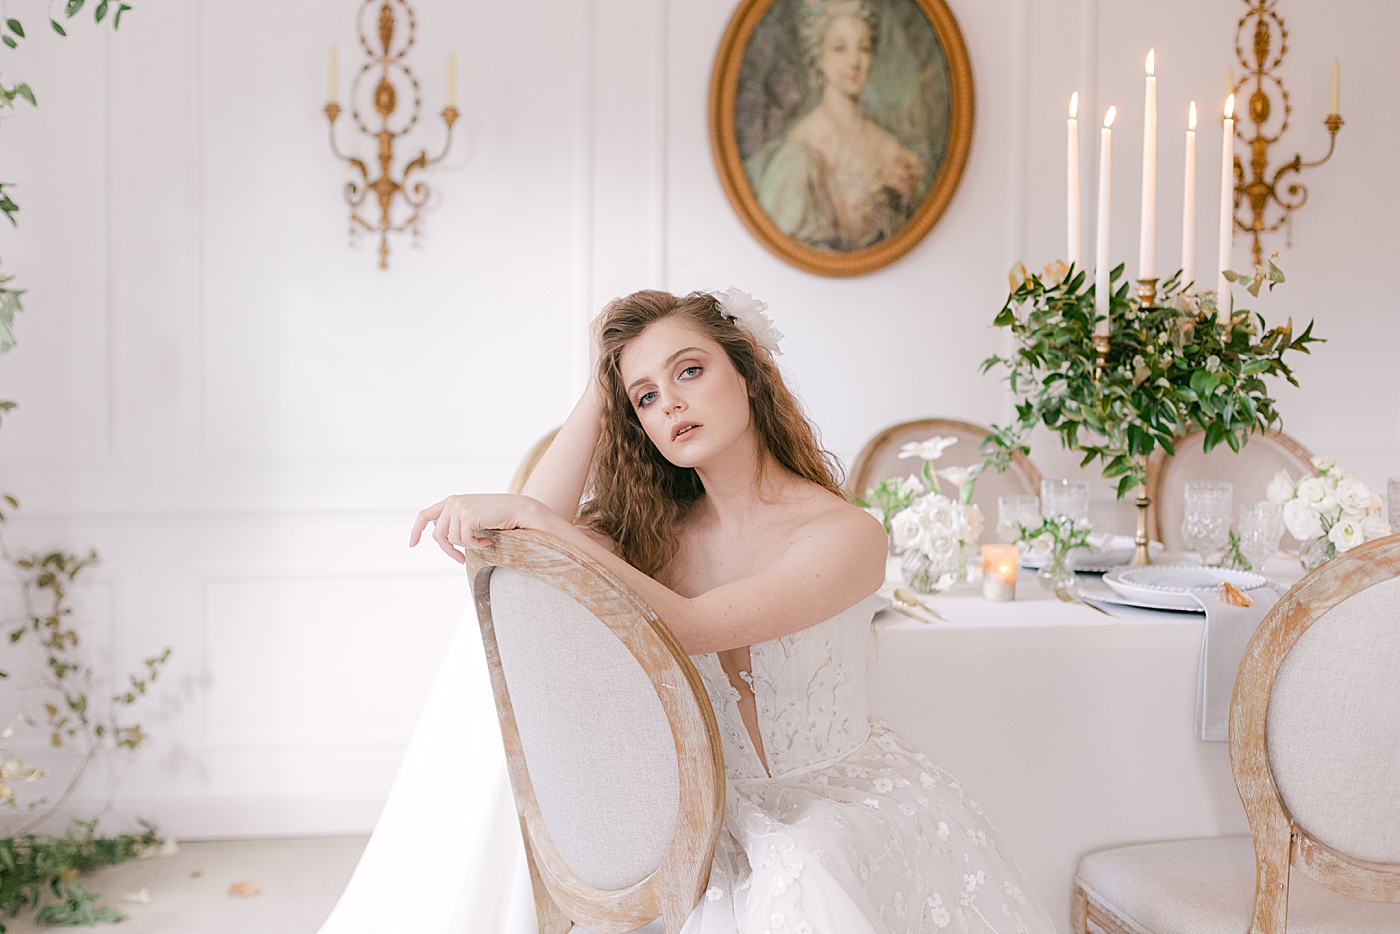 Woman with wavy hair and wedding gown sitting in a chair | Photo by Hope Helmuth Photograpghy